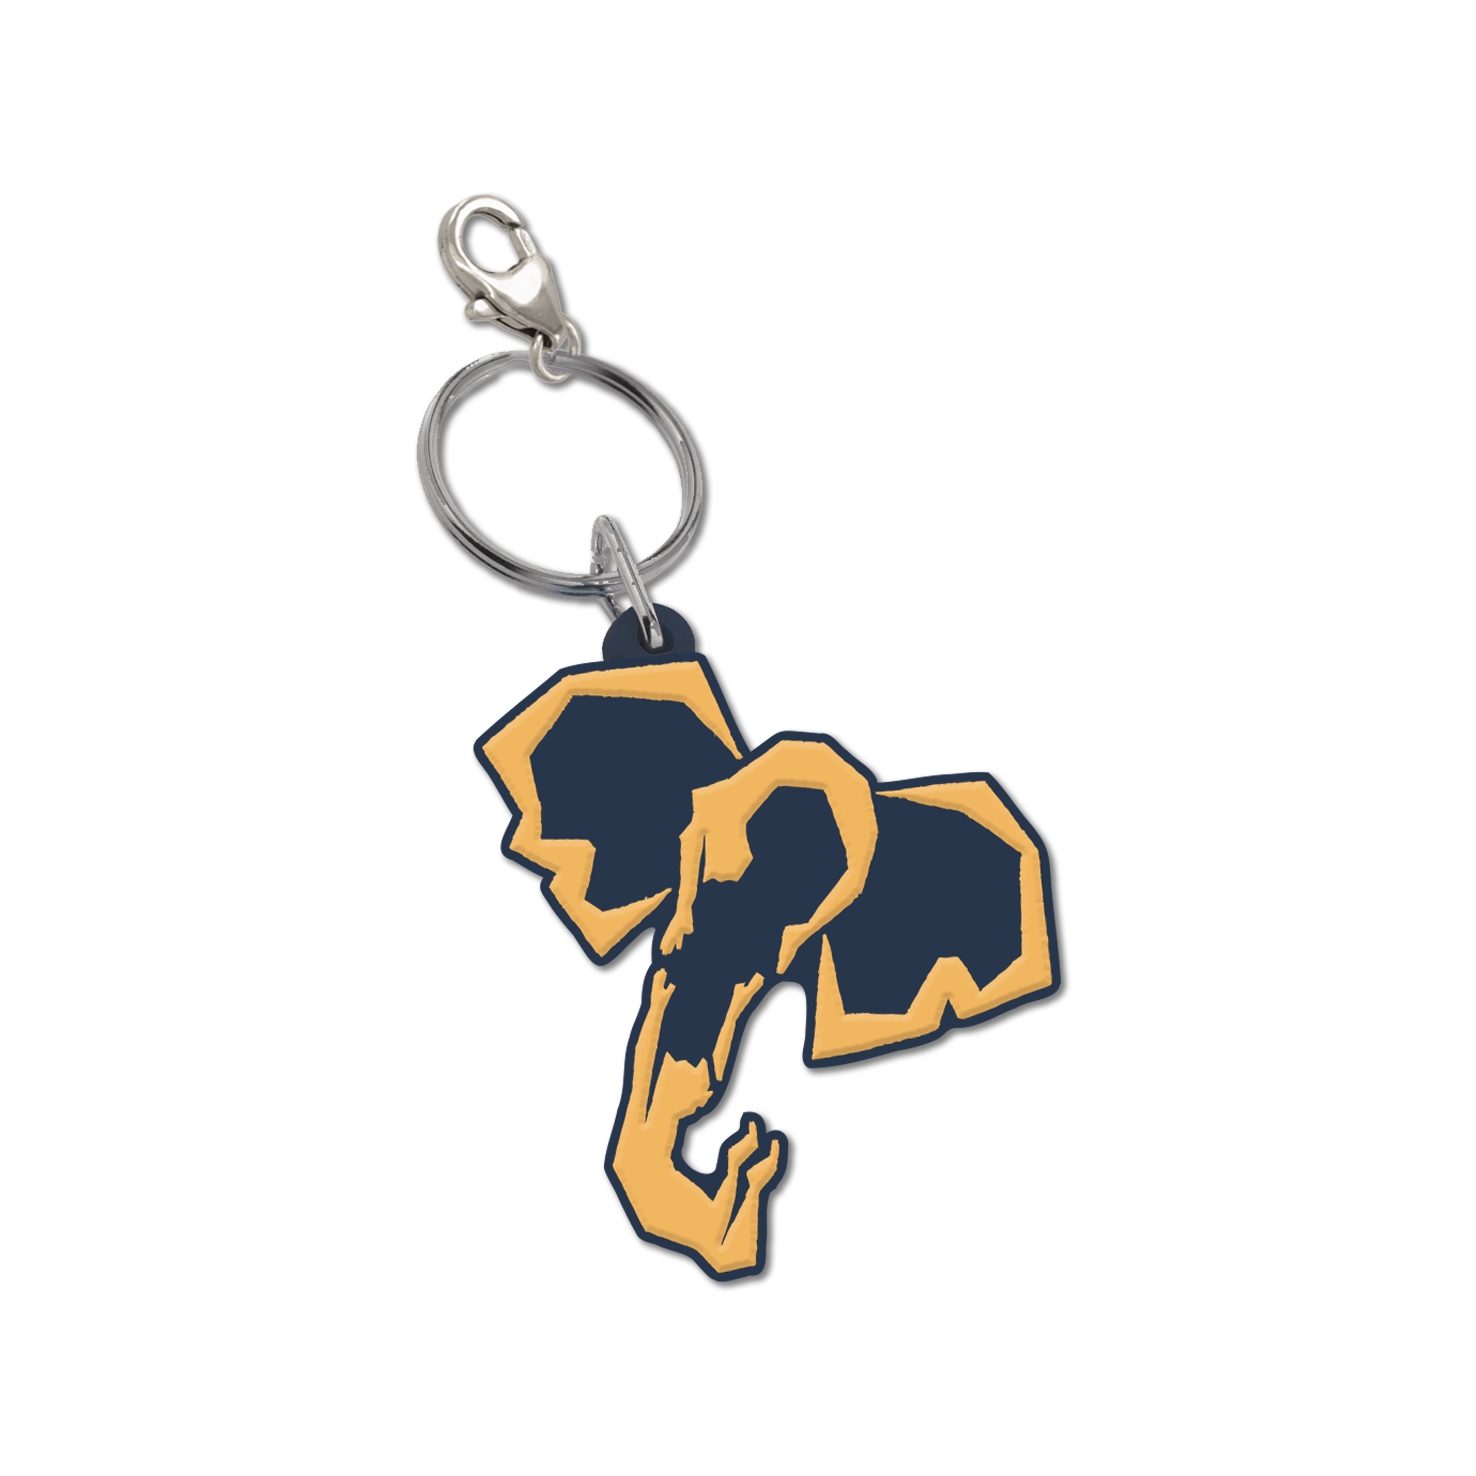 WATER FOR ELEPHANTS Rubber Keychain - Image 1